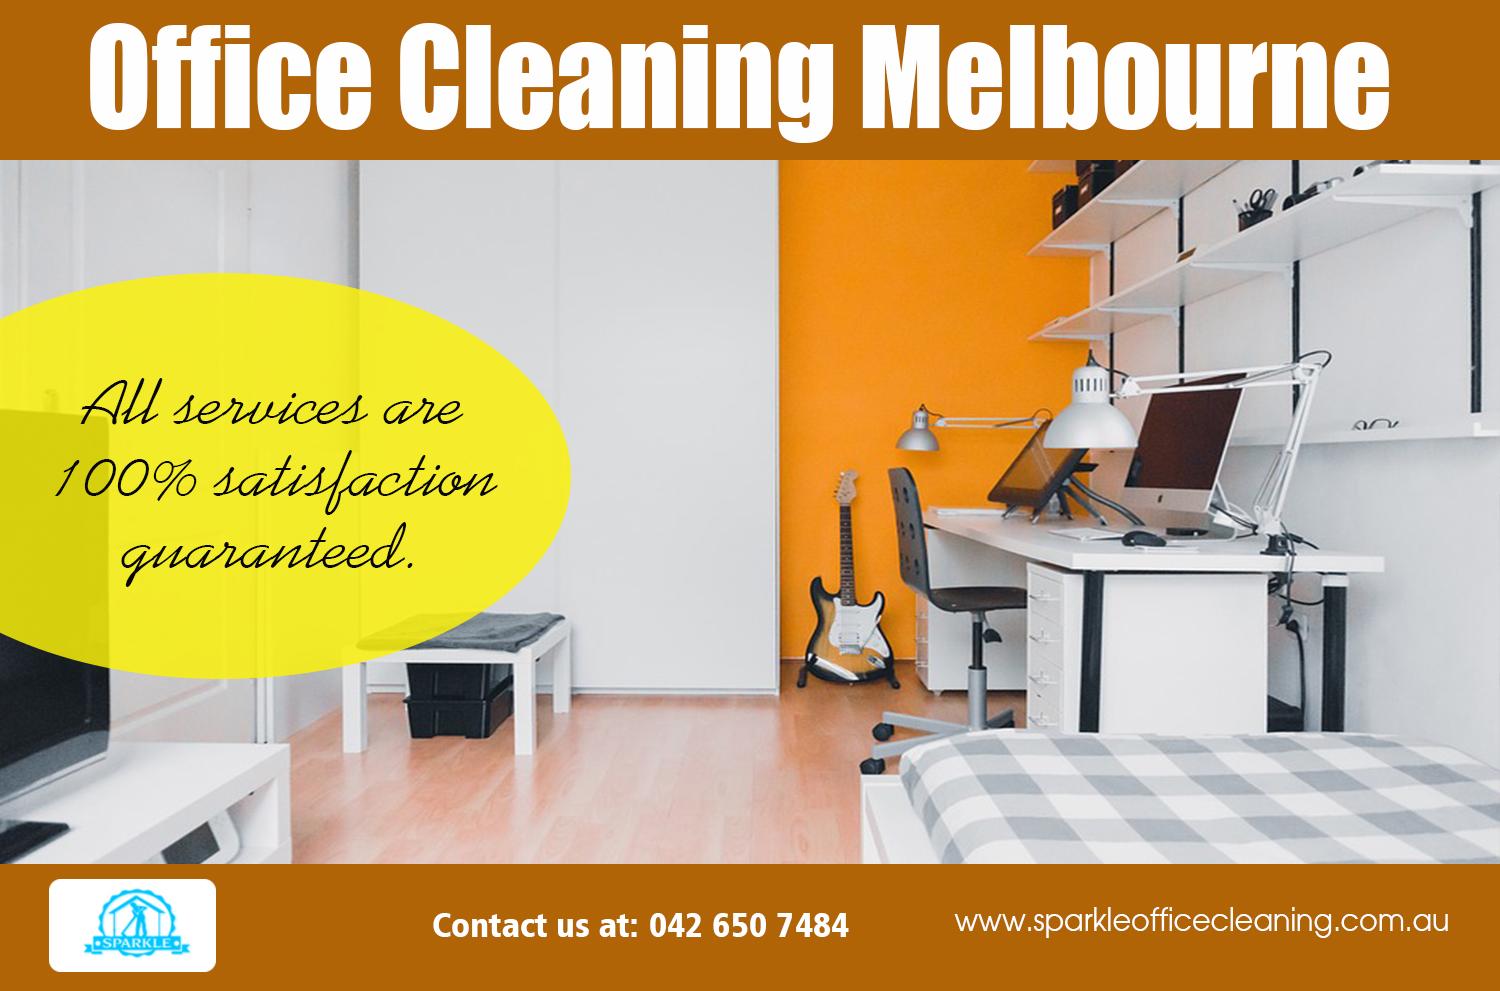 Office Cleaning in Melbourne | sparkleofficecleaning.com.au